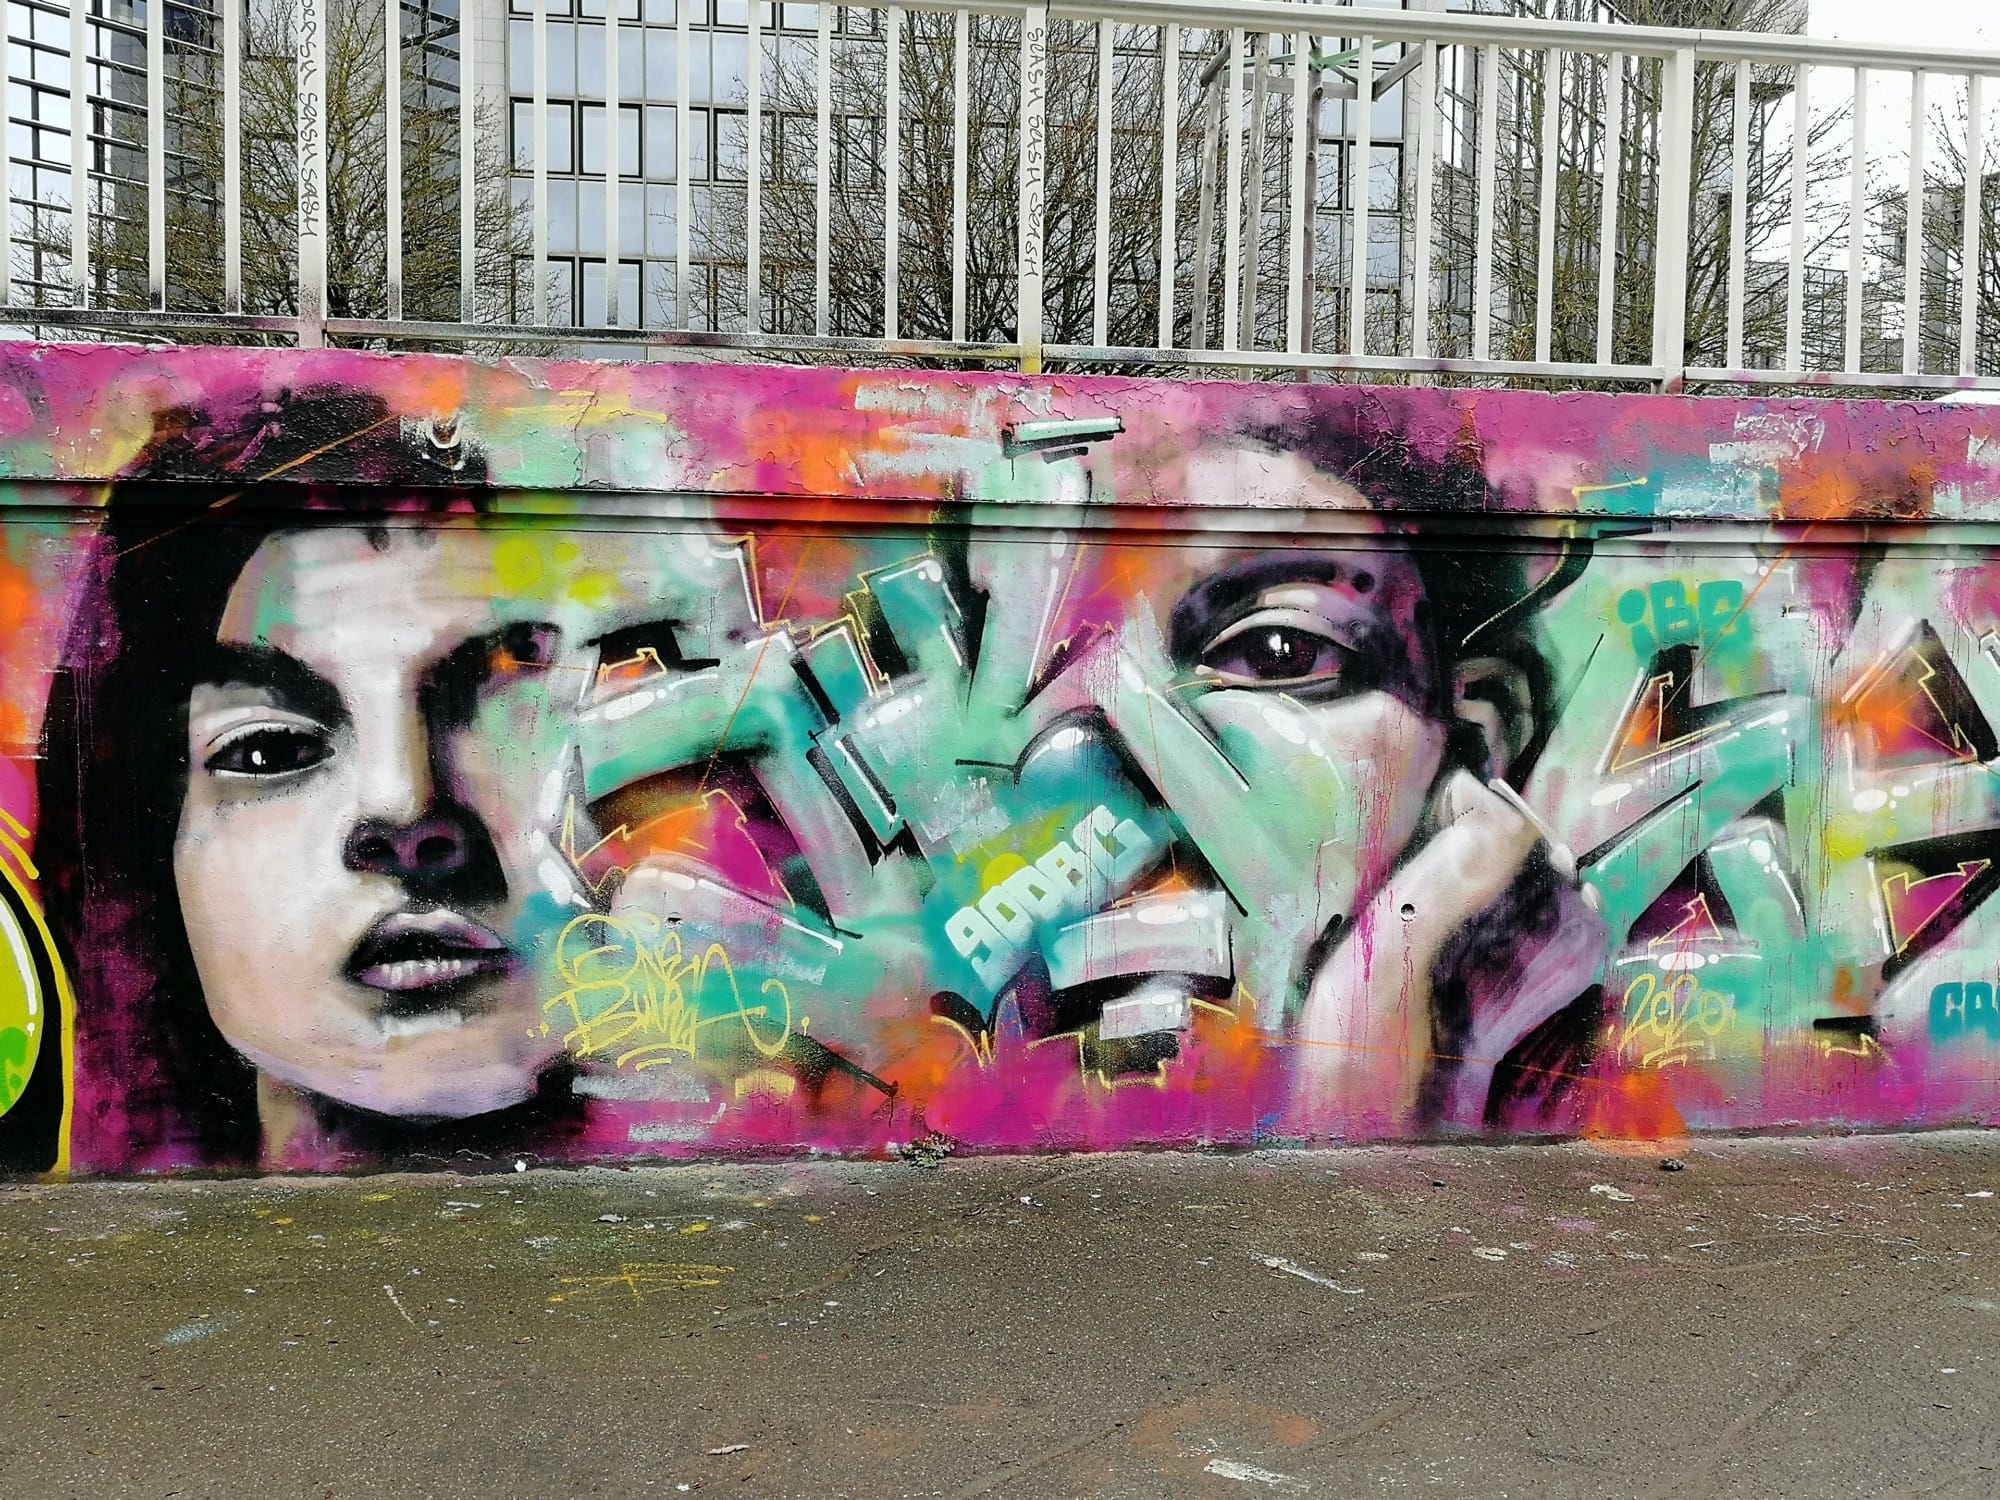 Graffiti 4037  captured by Rabot in Nantes France